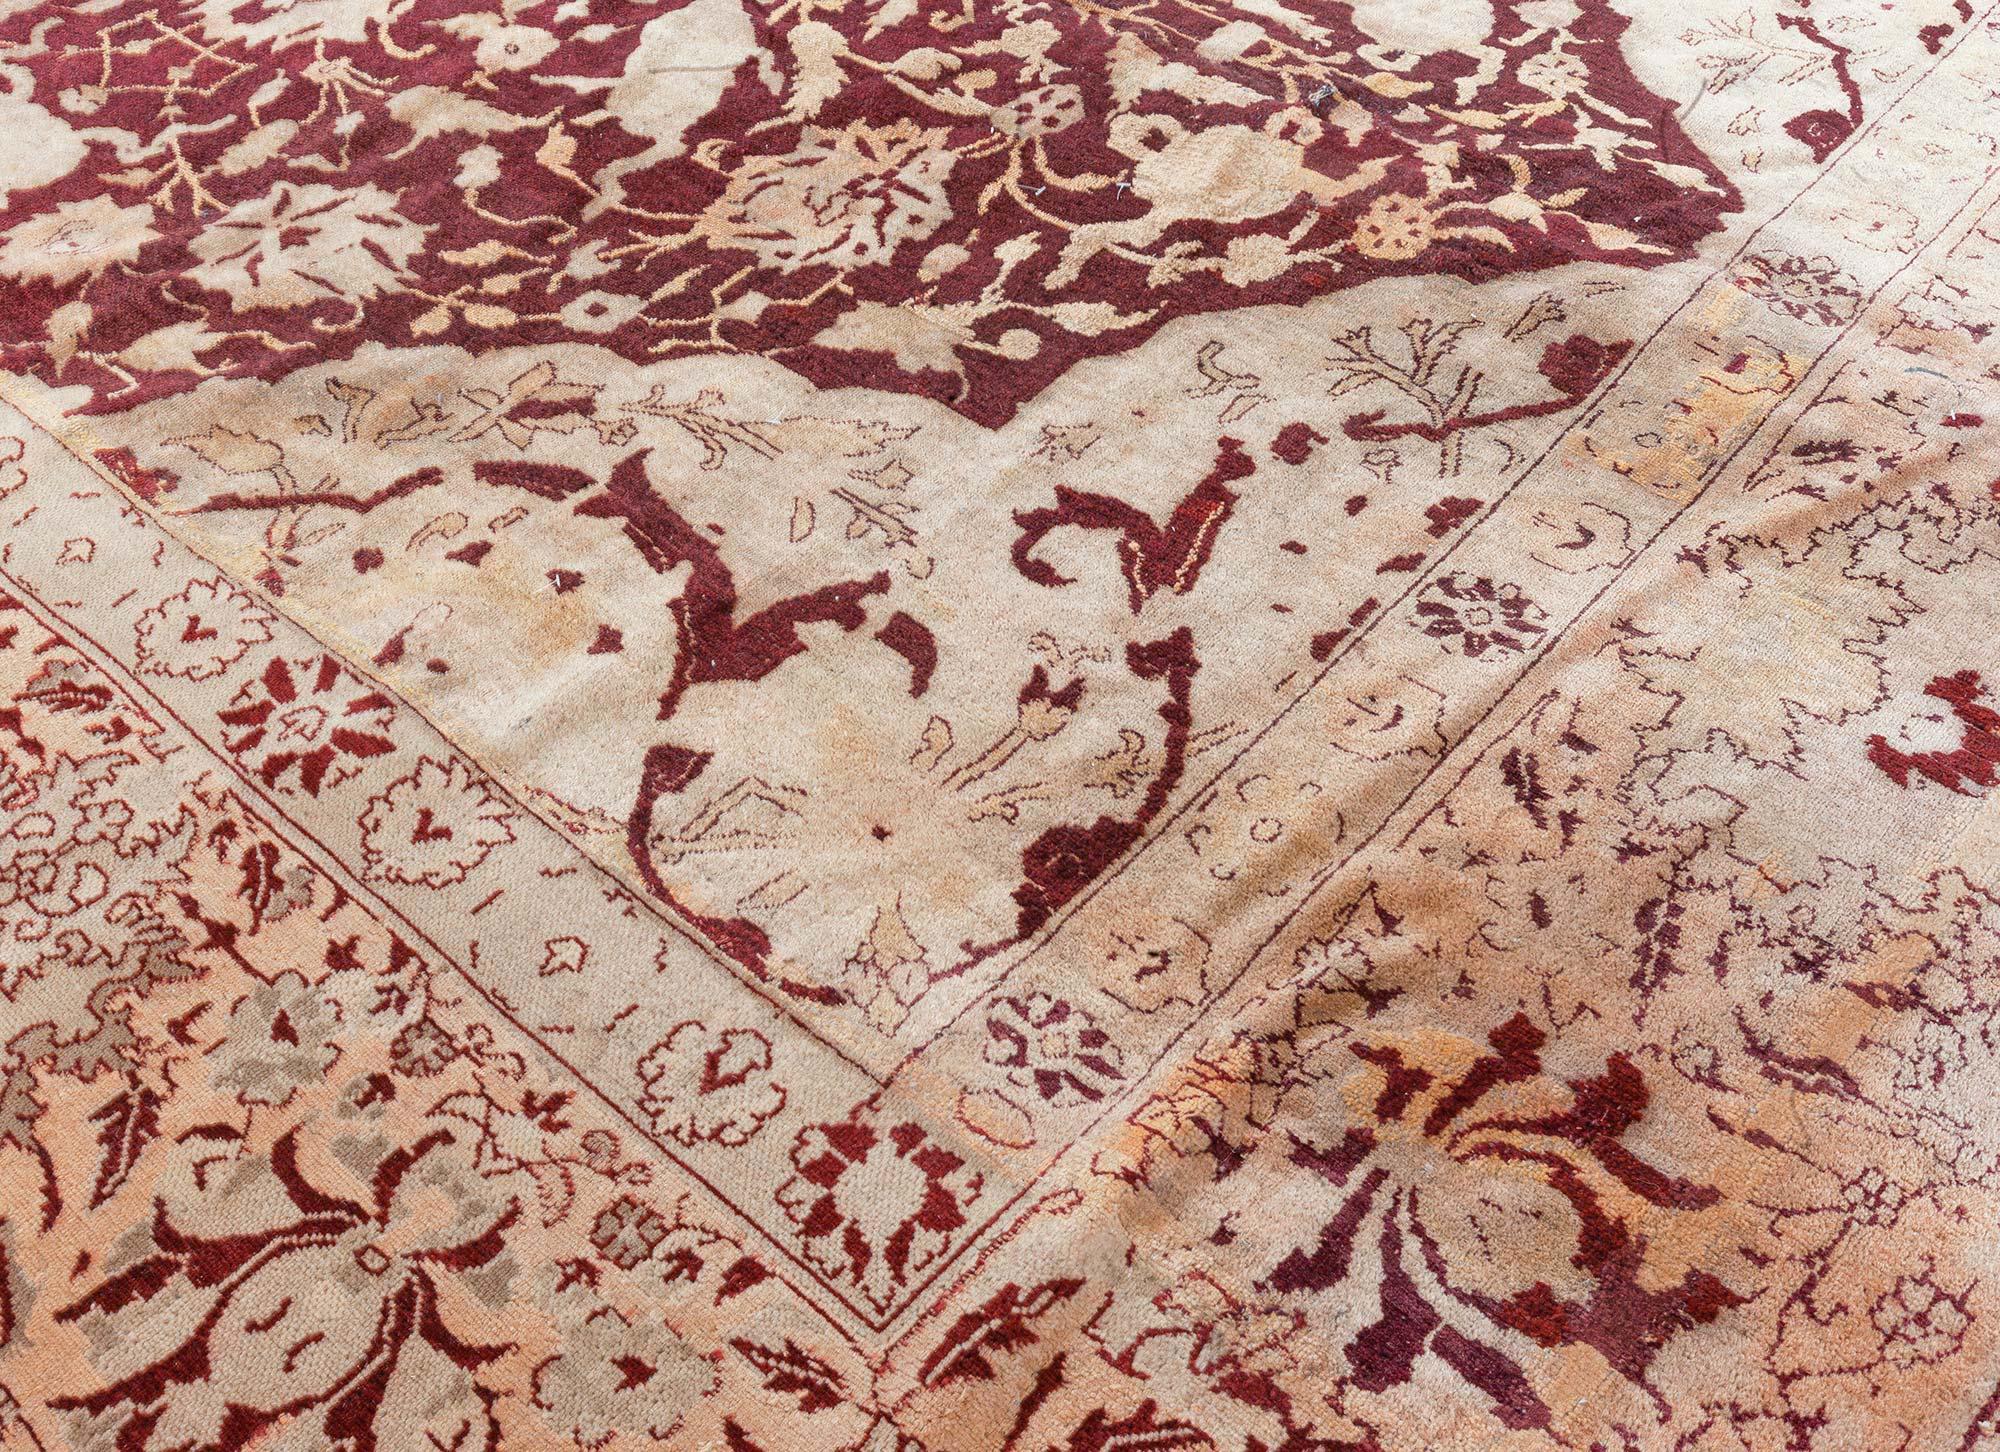 20th Century Antique Indian Amritsar Red and Beige Wool Carpet